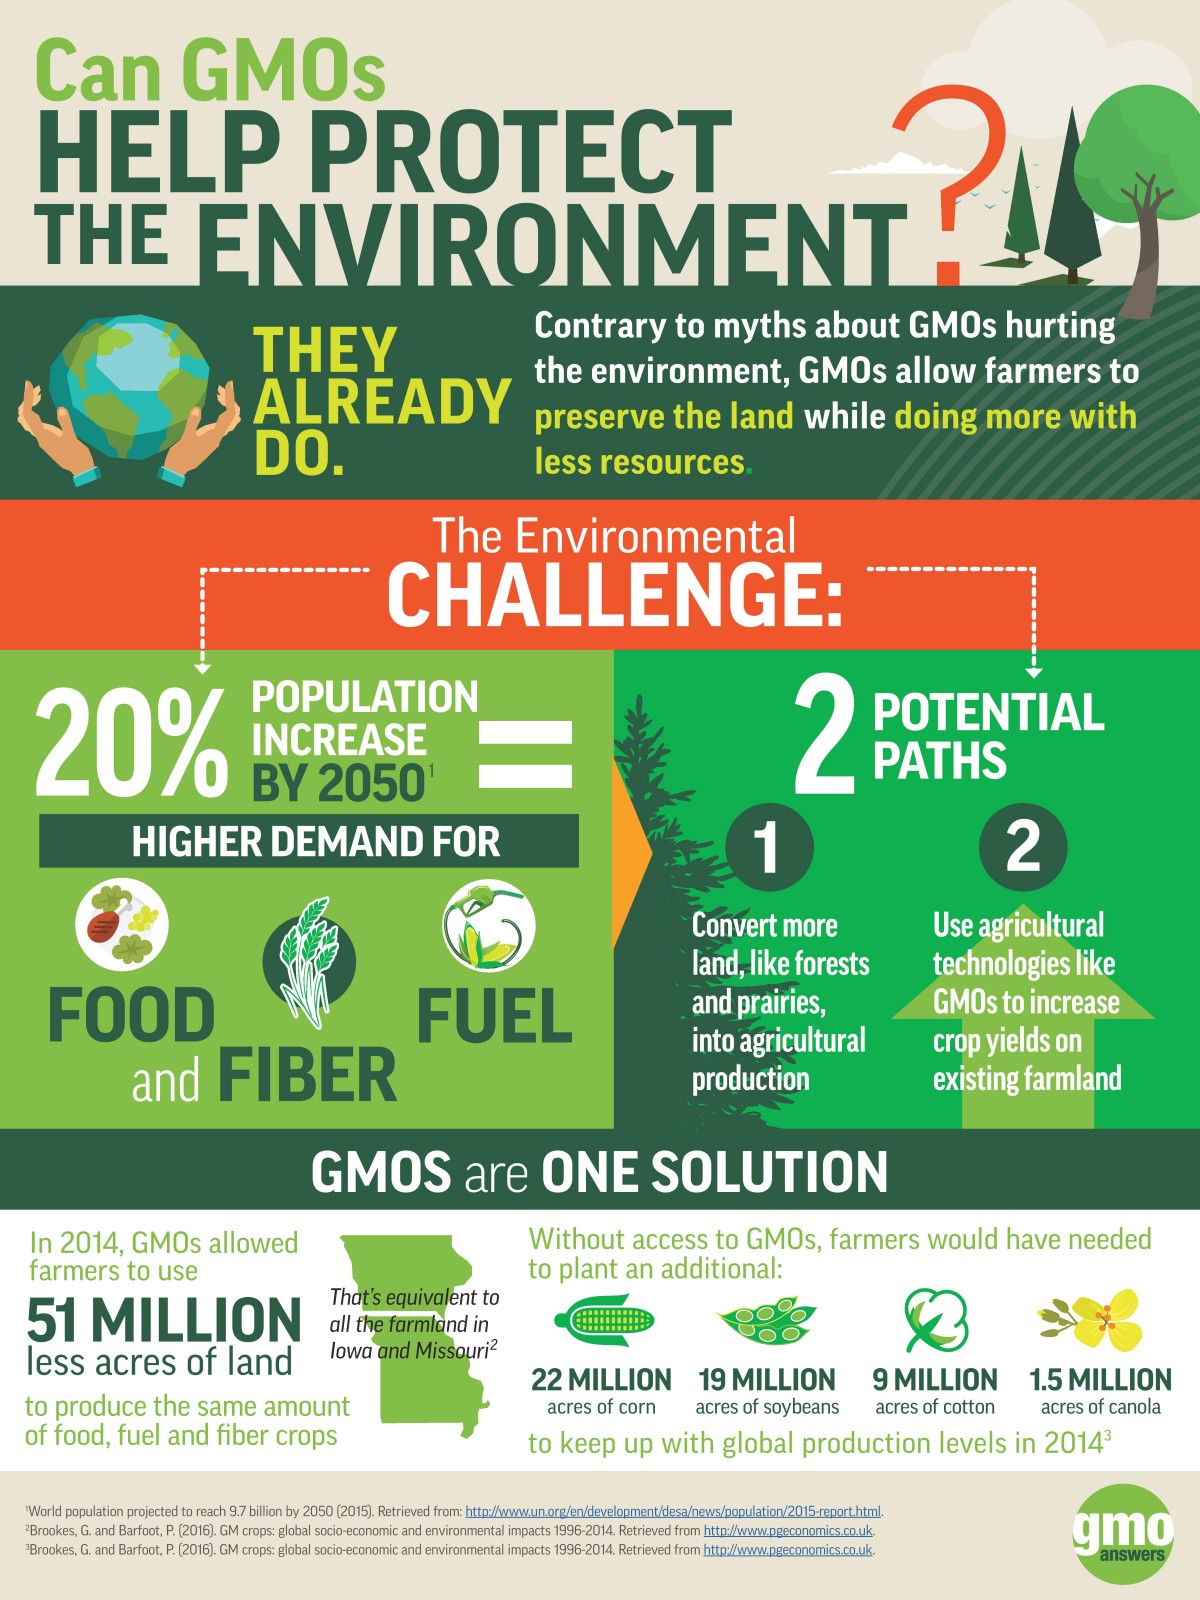 https://gmoanswers.com/sites/default/files/Can-GMOs-help-protect-the-environment-1200x1600.jpg